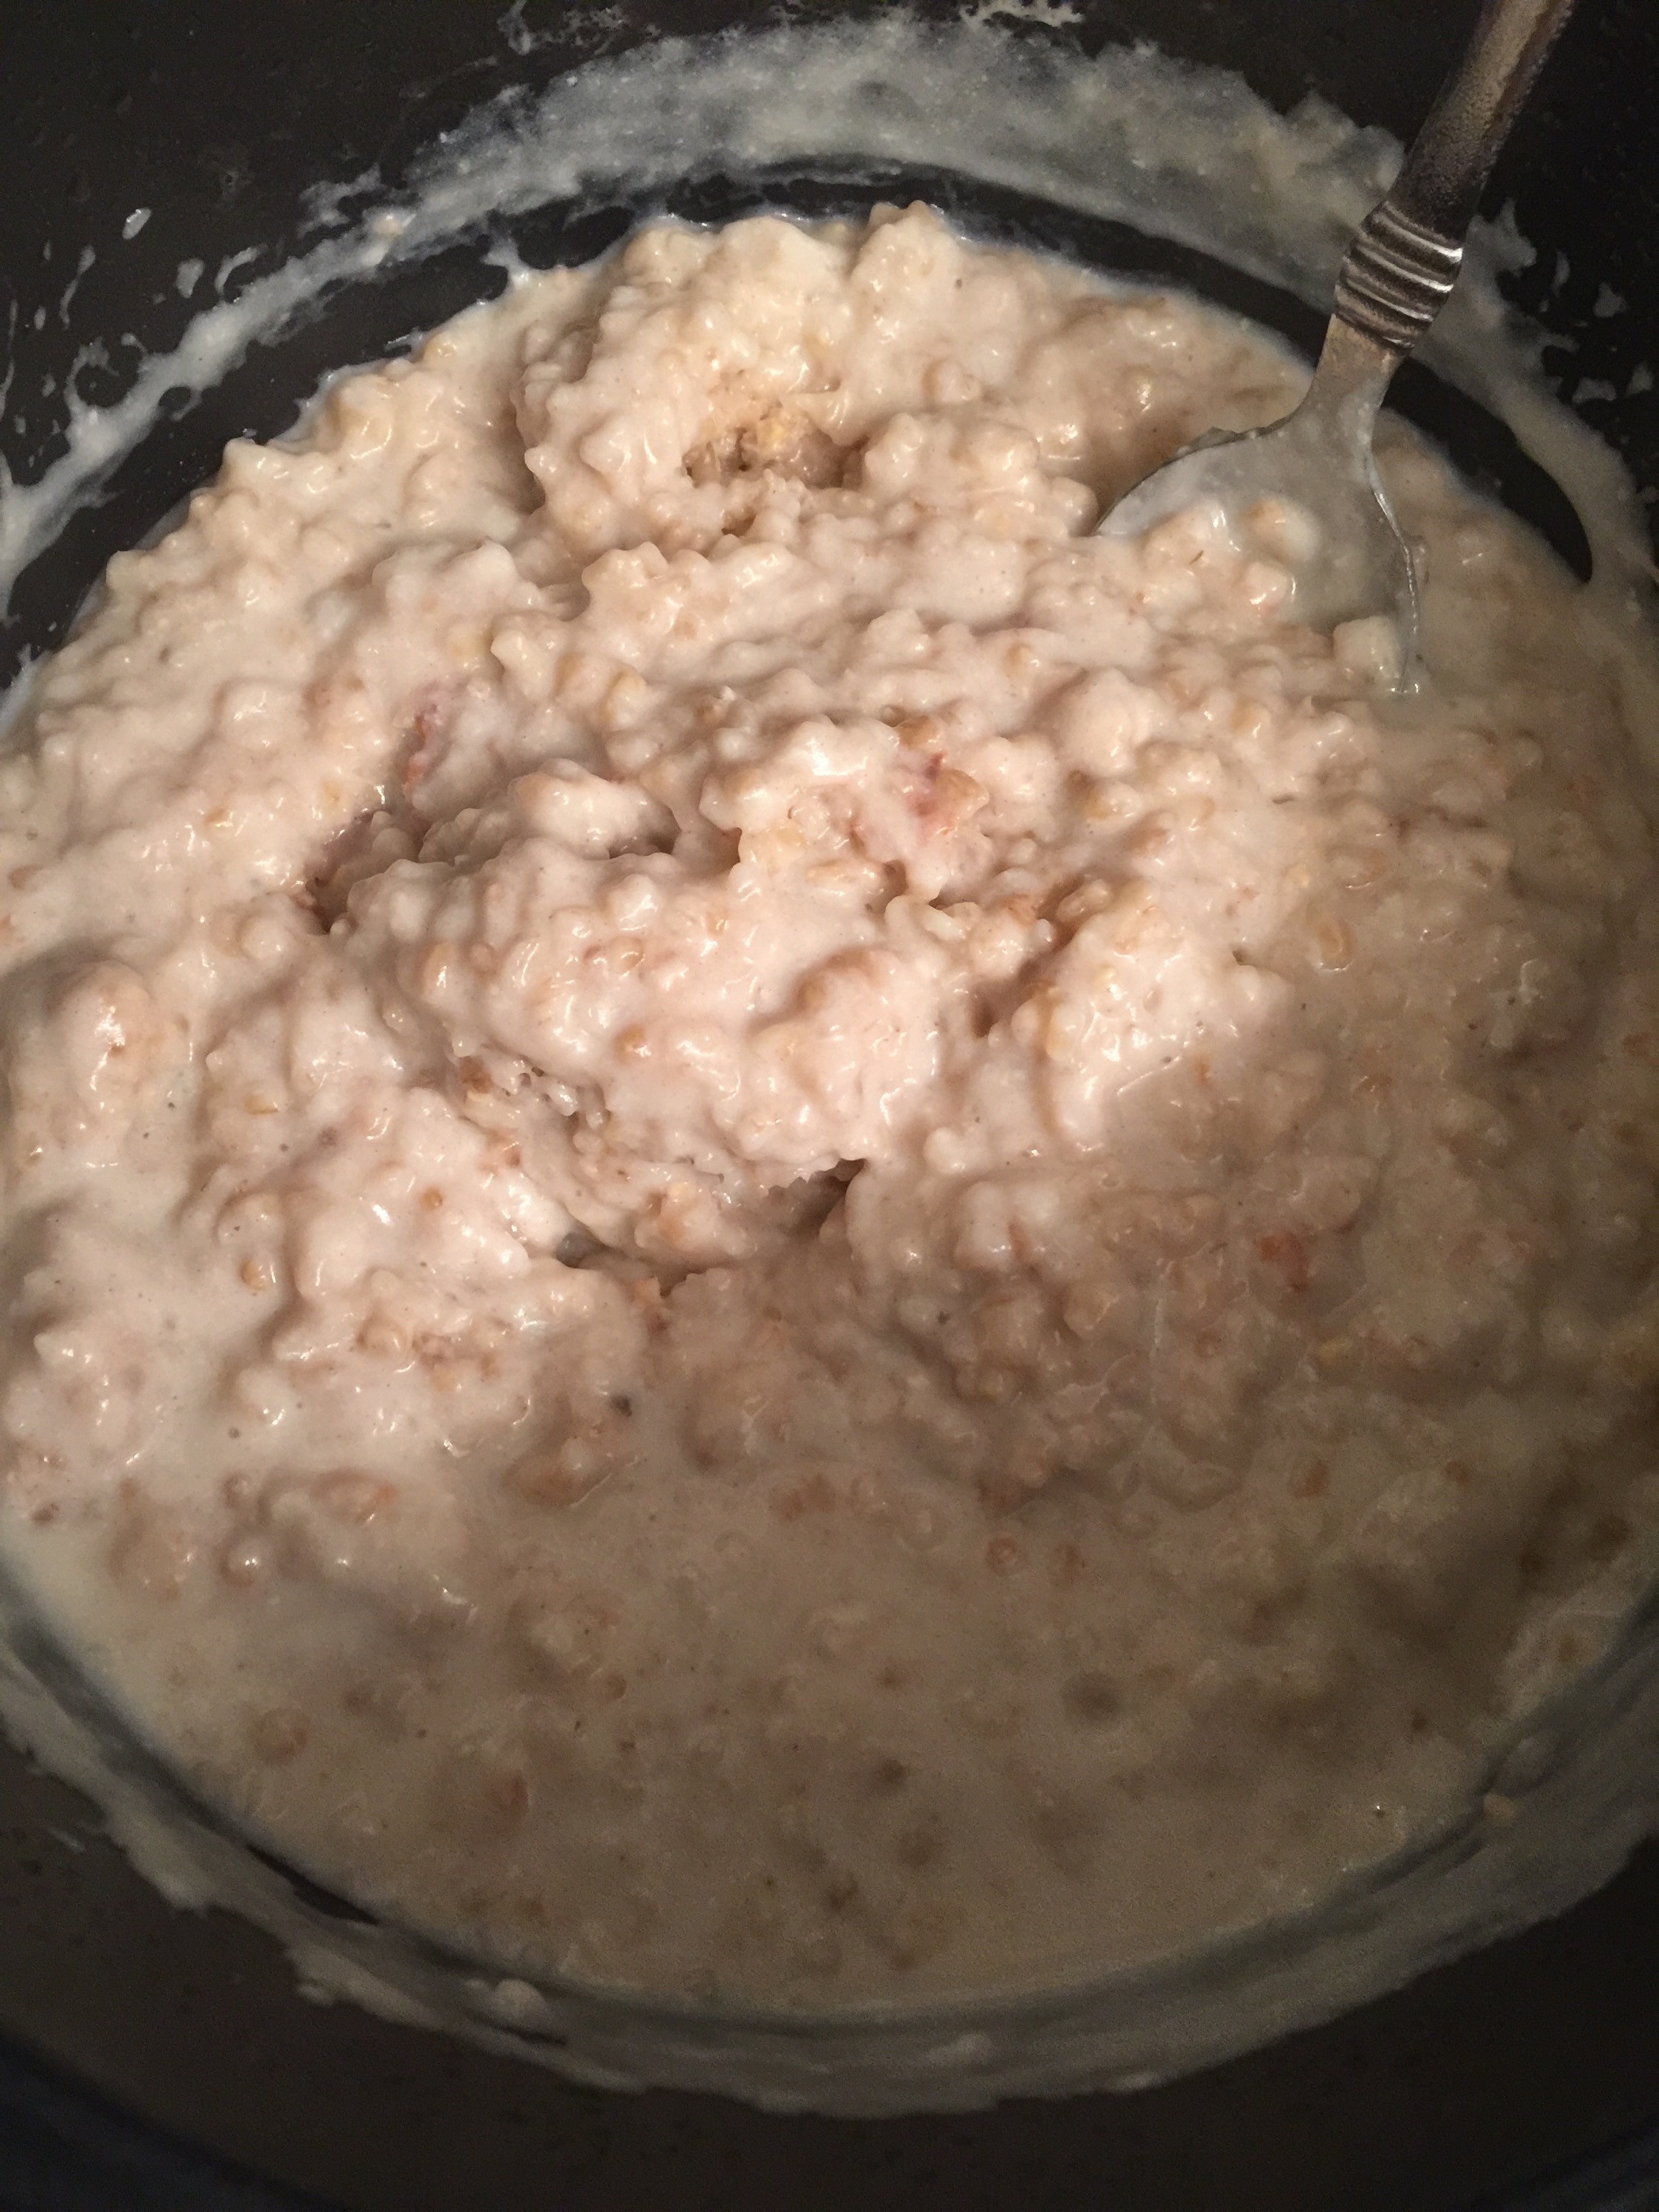 Steel Cut Oats In Rice Cooker
 How To Make Steel Cut Oats in a Rice Cooker Erin s